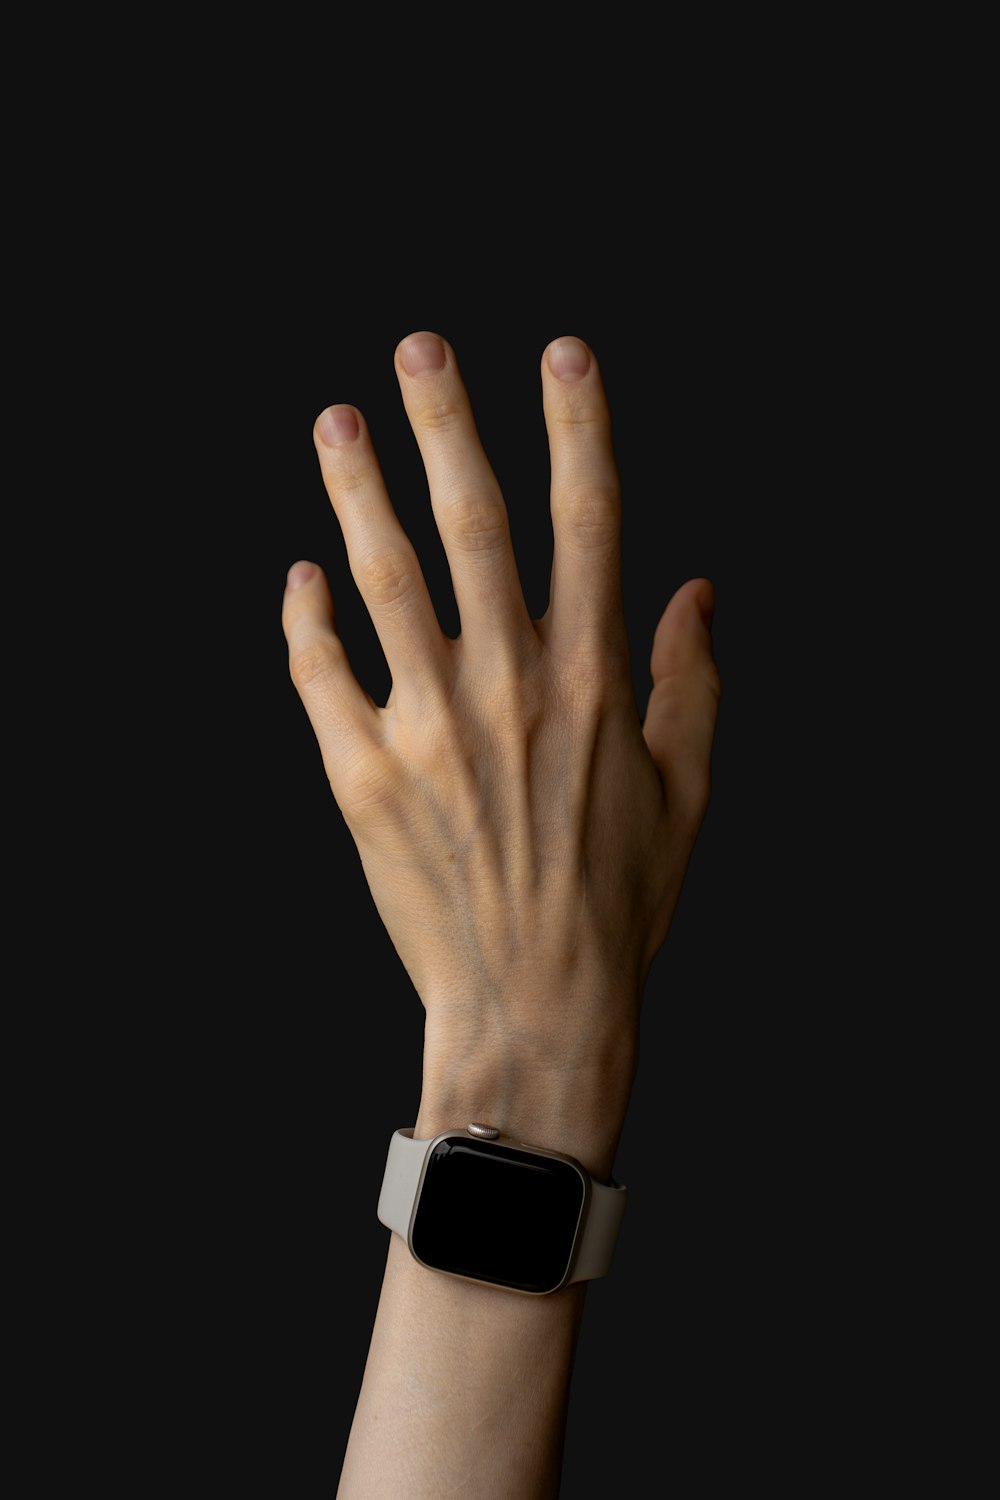 a person's hand with an apple watch on it